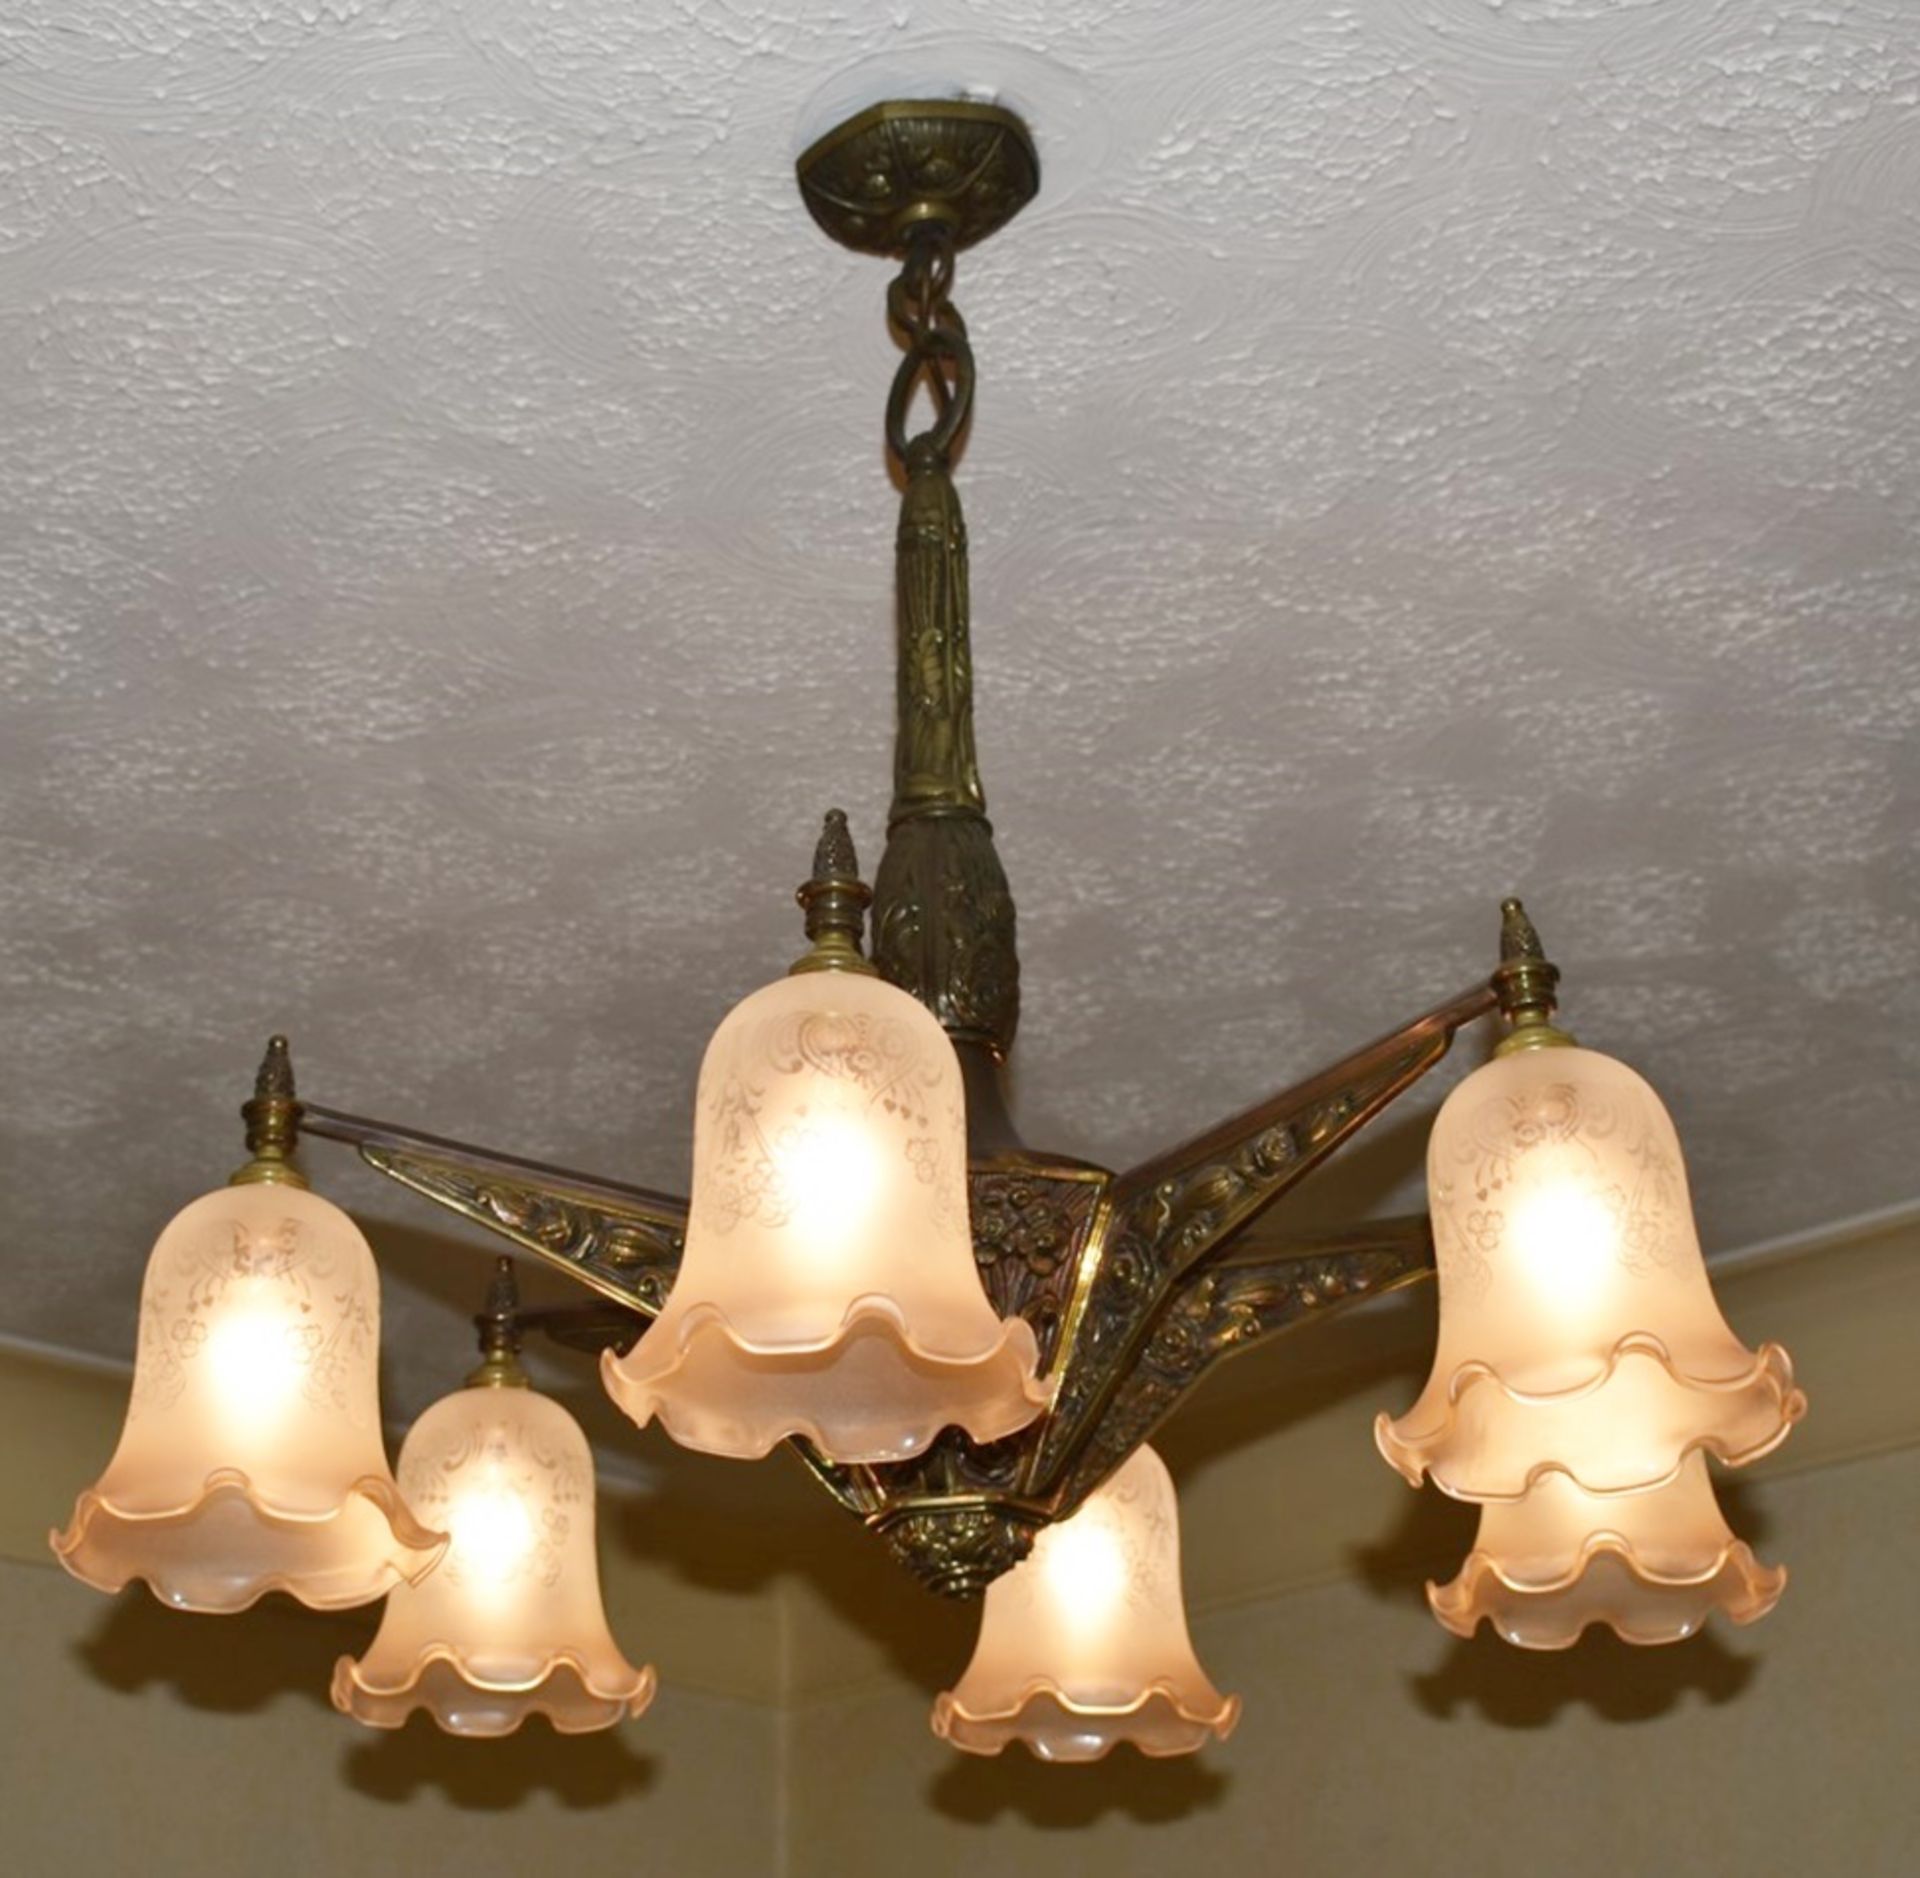 1 x Vintage 6 Light Bronze Chandelier With Frosted Glass Tulip Bell Shades - Dimensions: Drop 72 x - Image 14 of 14